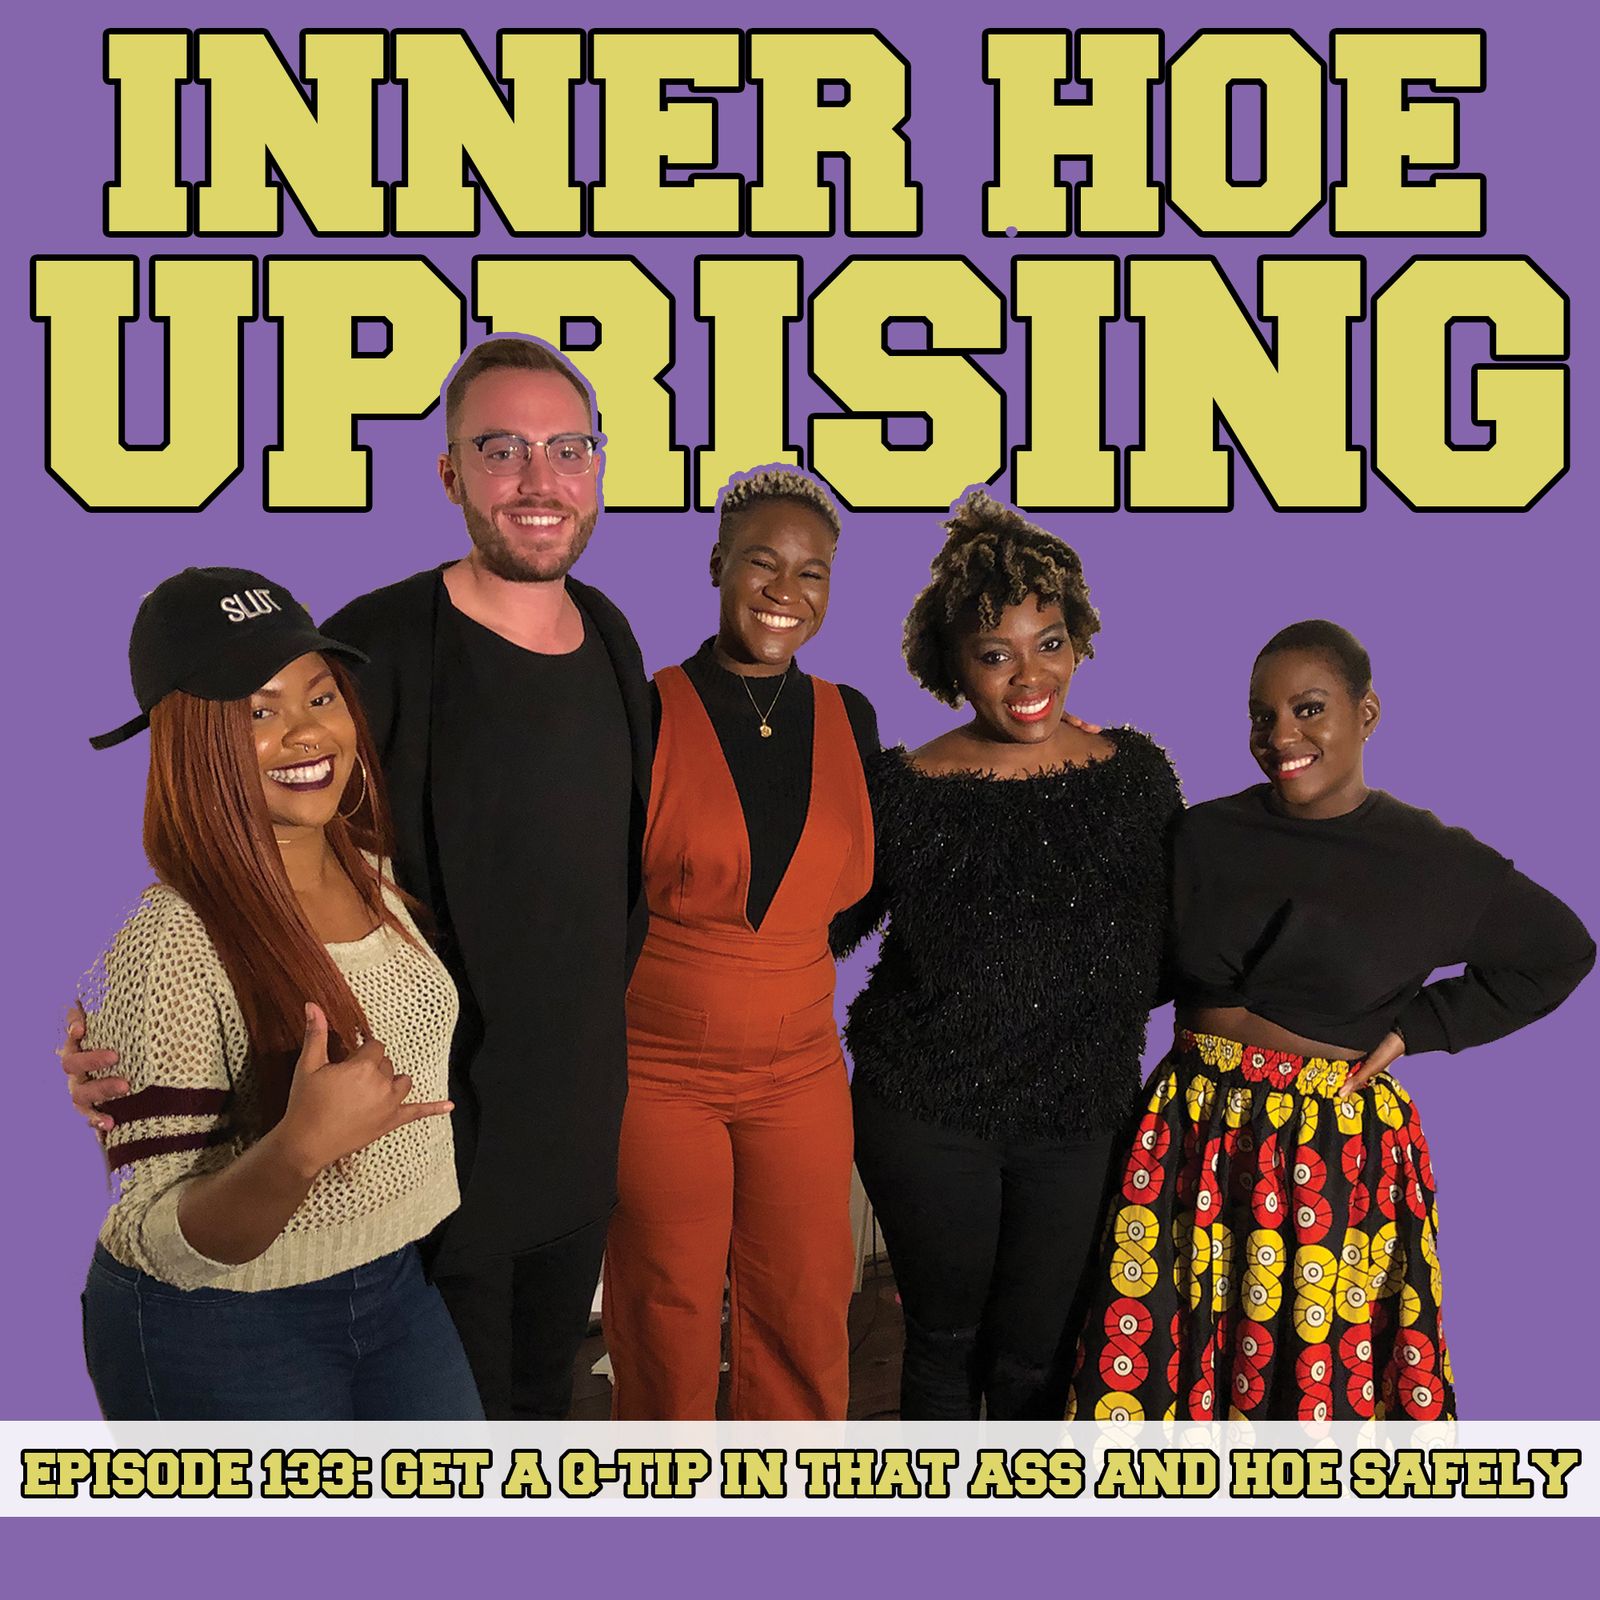 Thumbnail for "S5 Ep11: Get a Q-Tip in that Ass & Hoe Safely (IHU LIVE)".